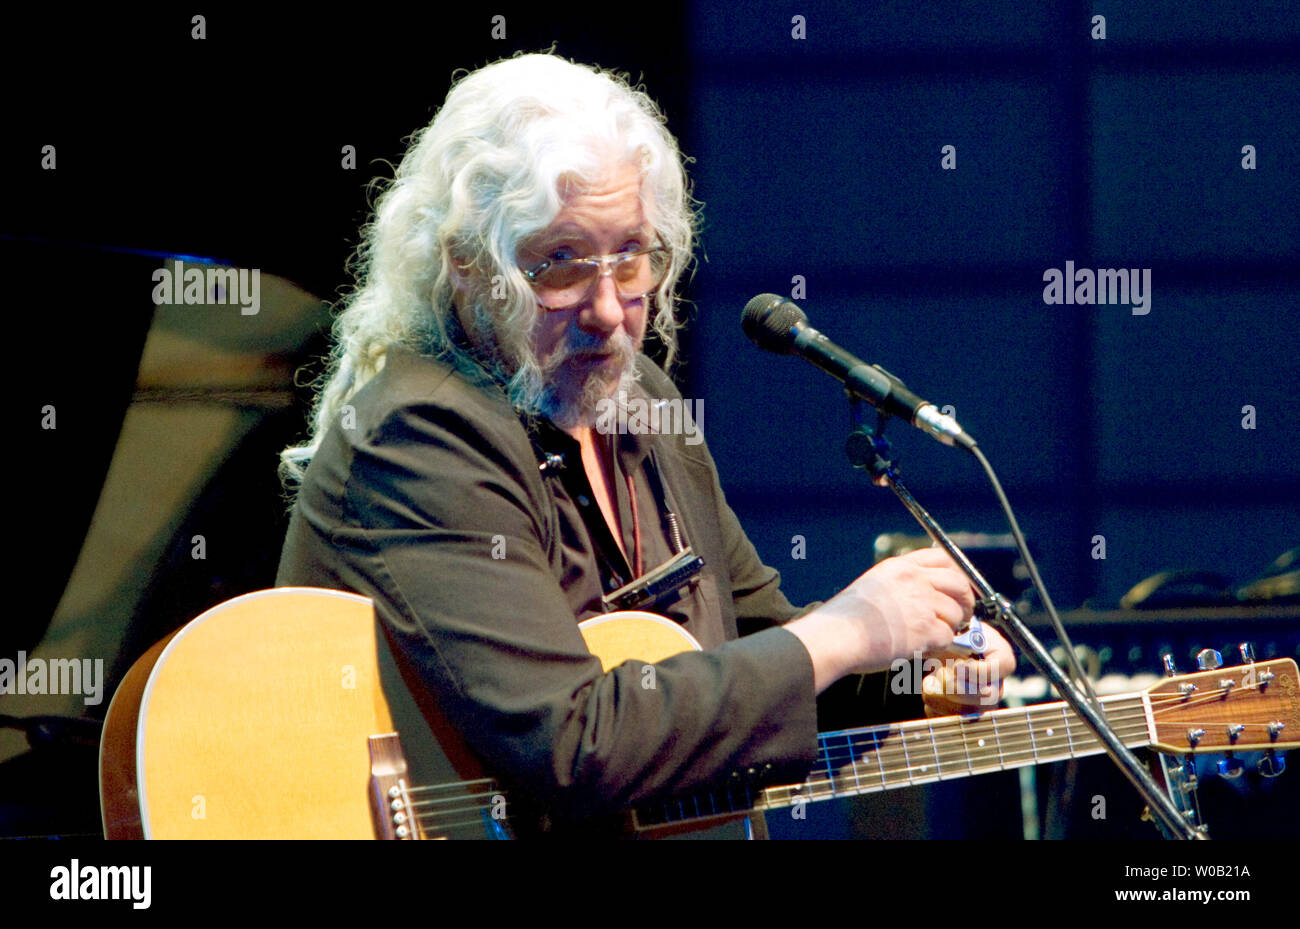 On tour, 57-year-old folk musician Arlo Guthrie the eldest son of Woody Guthrie performs to a packed house at Vancouver's University of British Columbia Chan Center Theater, April 19, 2005, the 40th anniversary of the song 'Alice's Restaurant.'   (UPI photo / Heinz Ruckemann ) Stock Photo